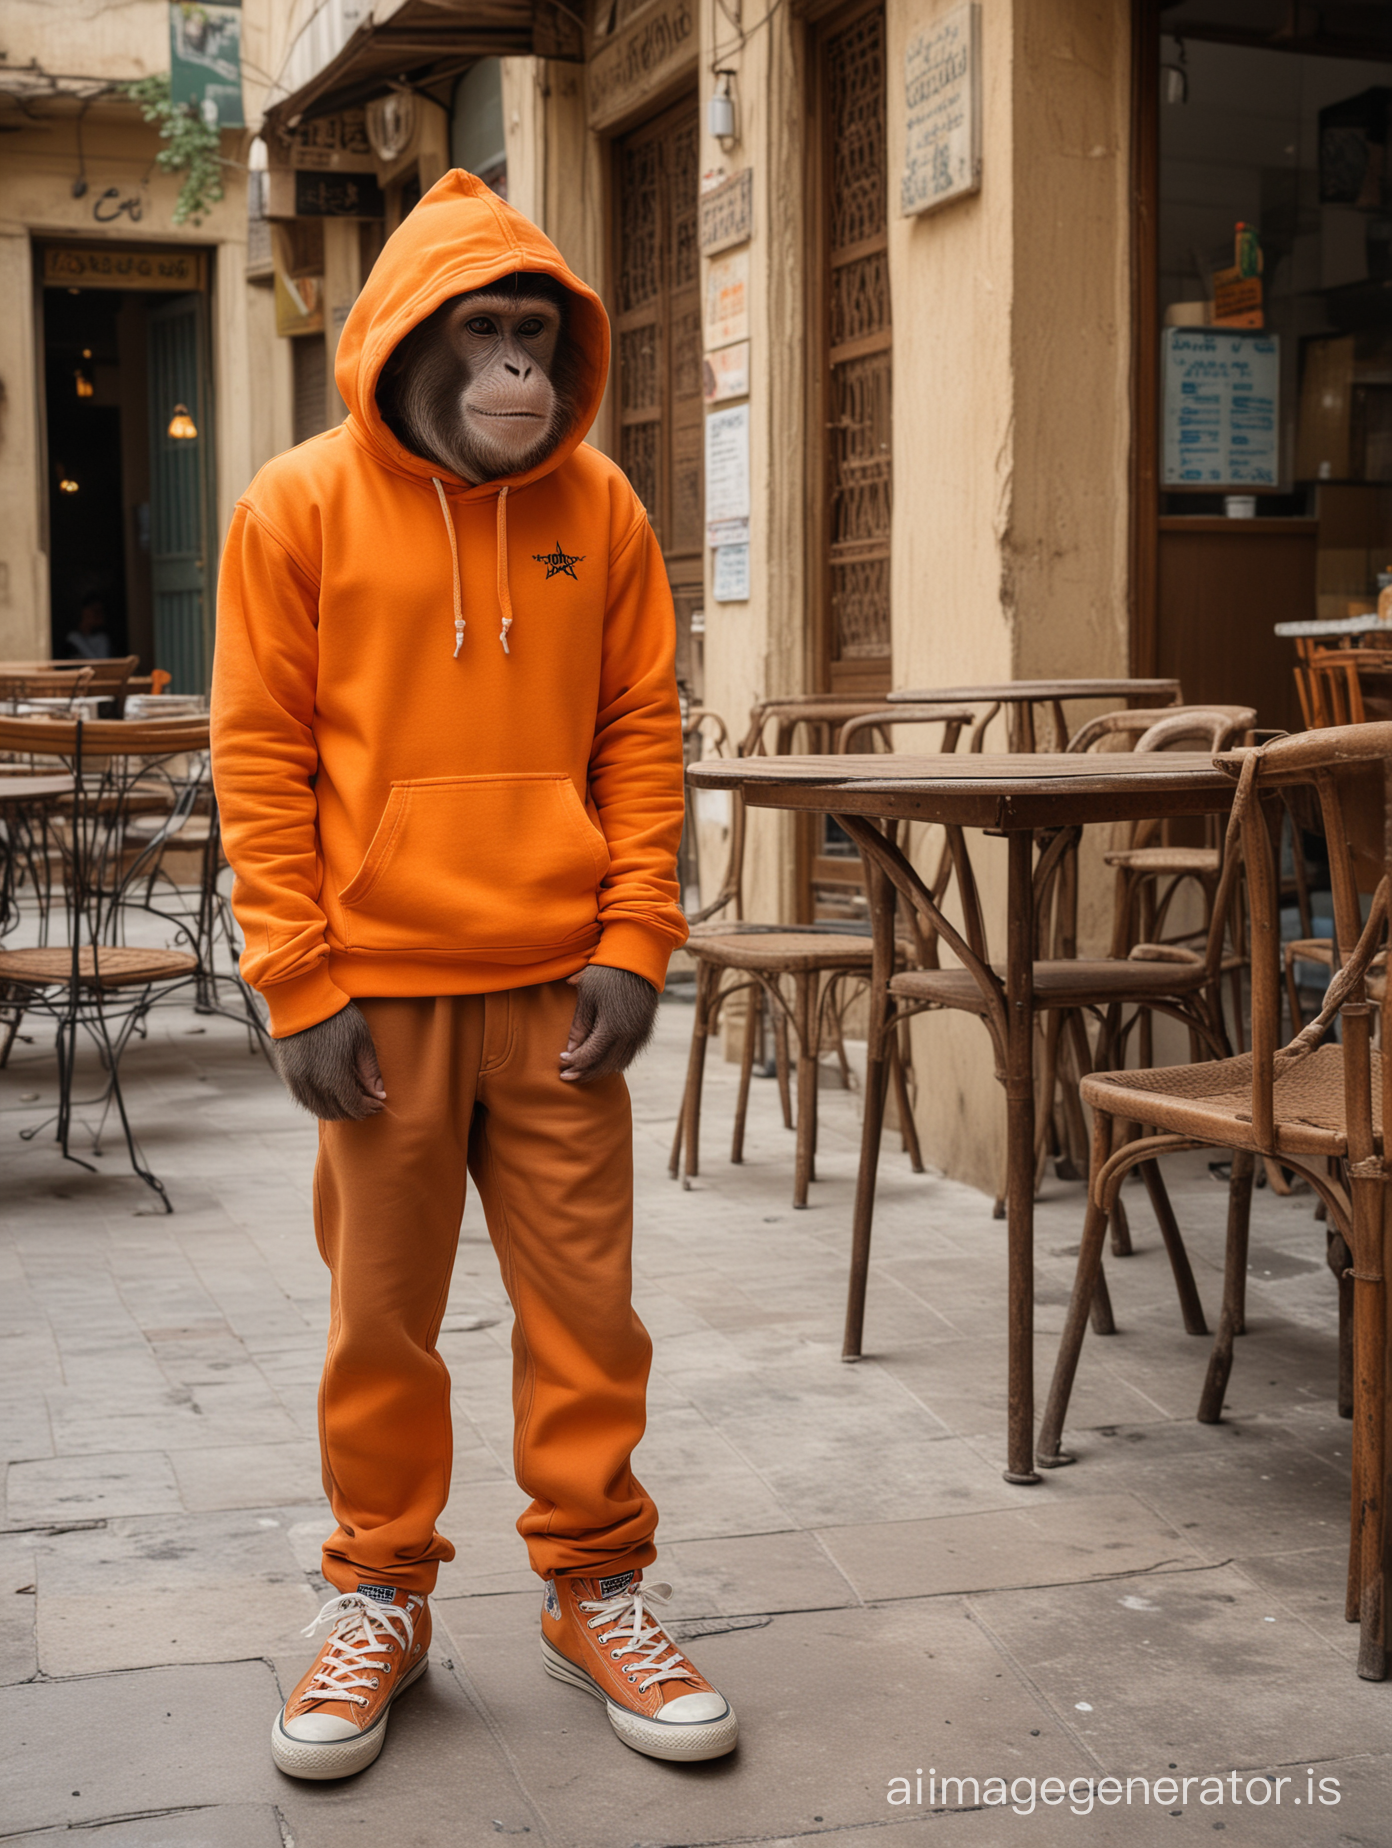 a monkey wear orange hoodi and brown pants with all star shoes standing in front of cafe in karim khan street.